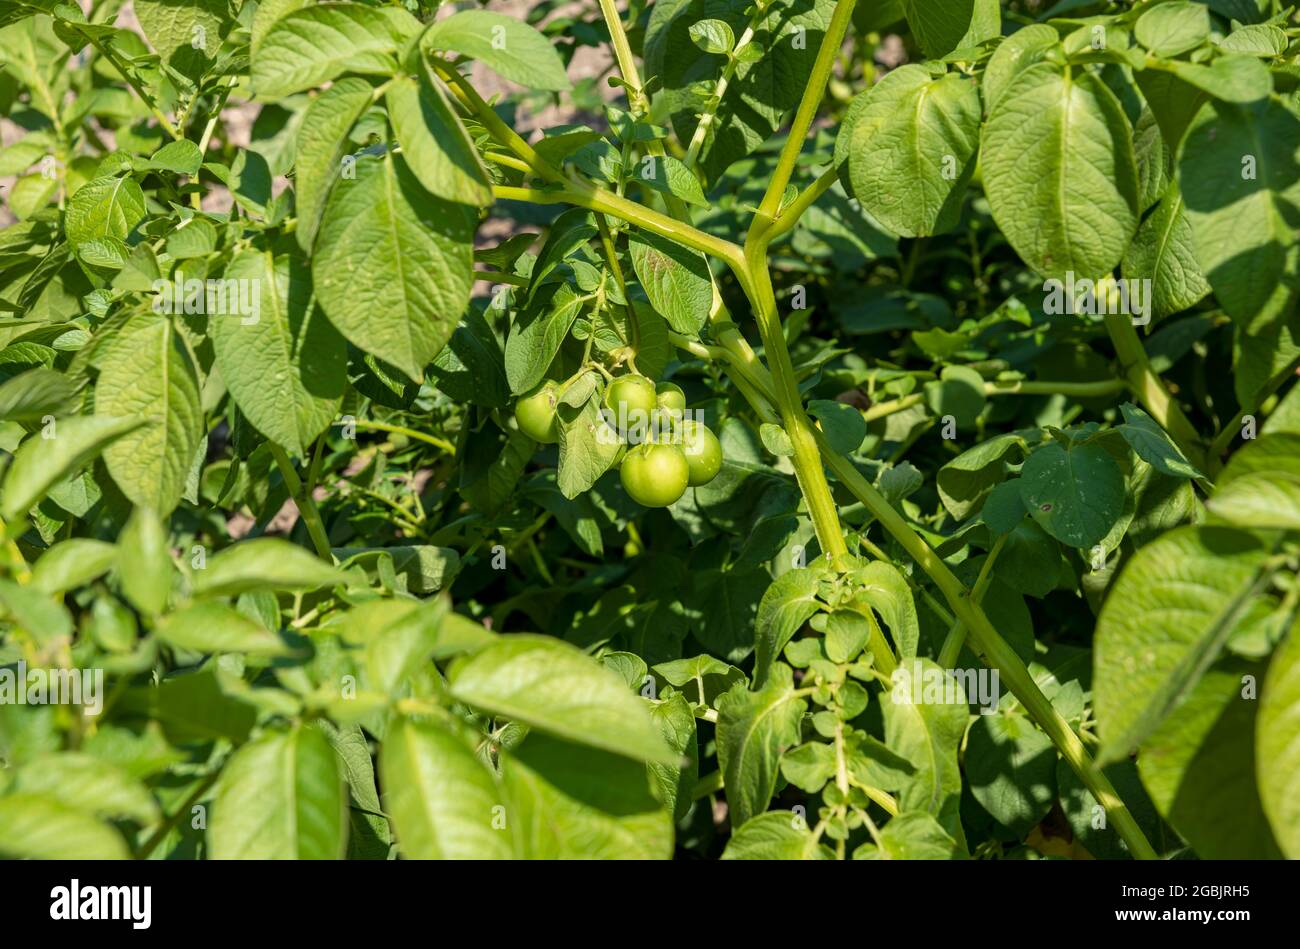 Close up of potato potatoes fruits berries growing on plants in the allotment garden in summer England UK United Kingdom GB Great Britain Stock Photo